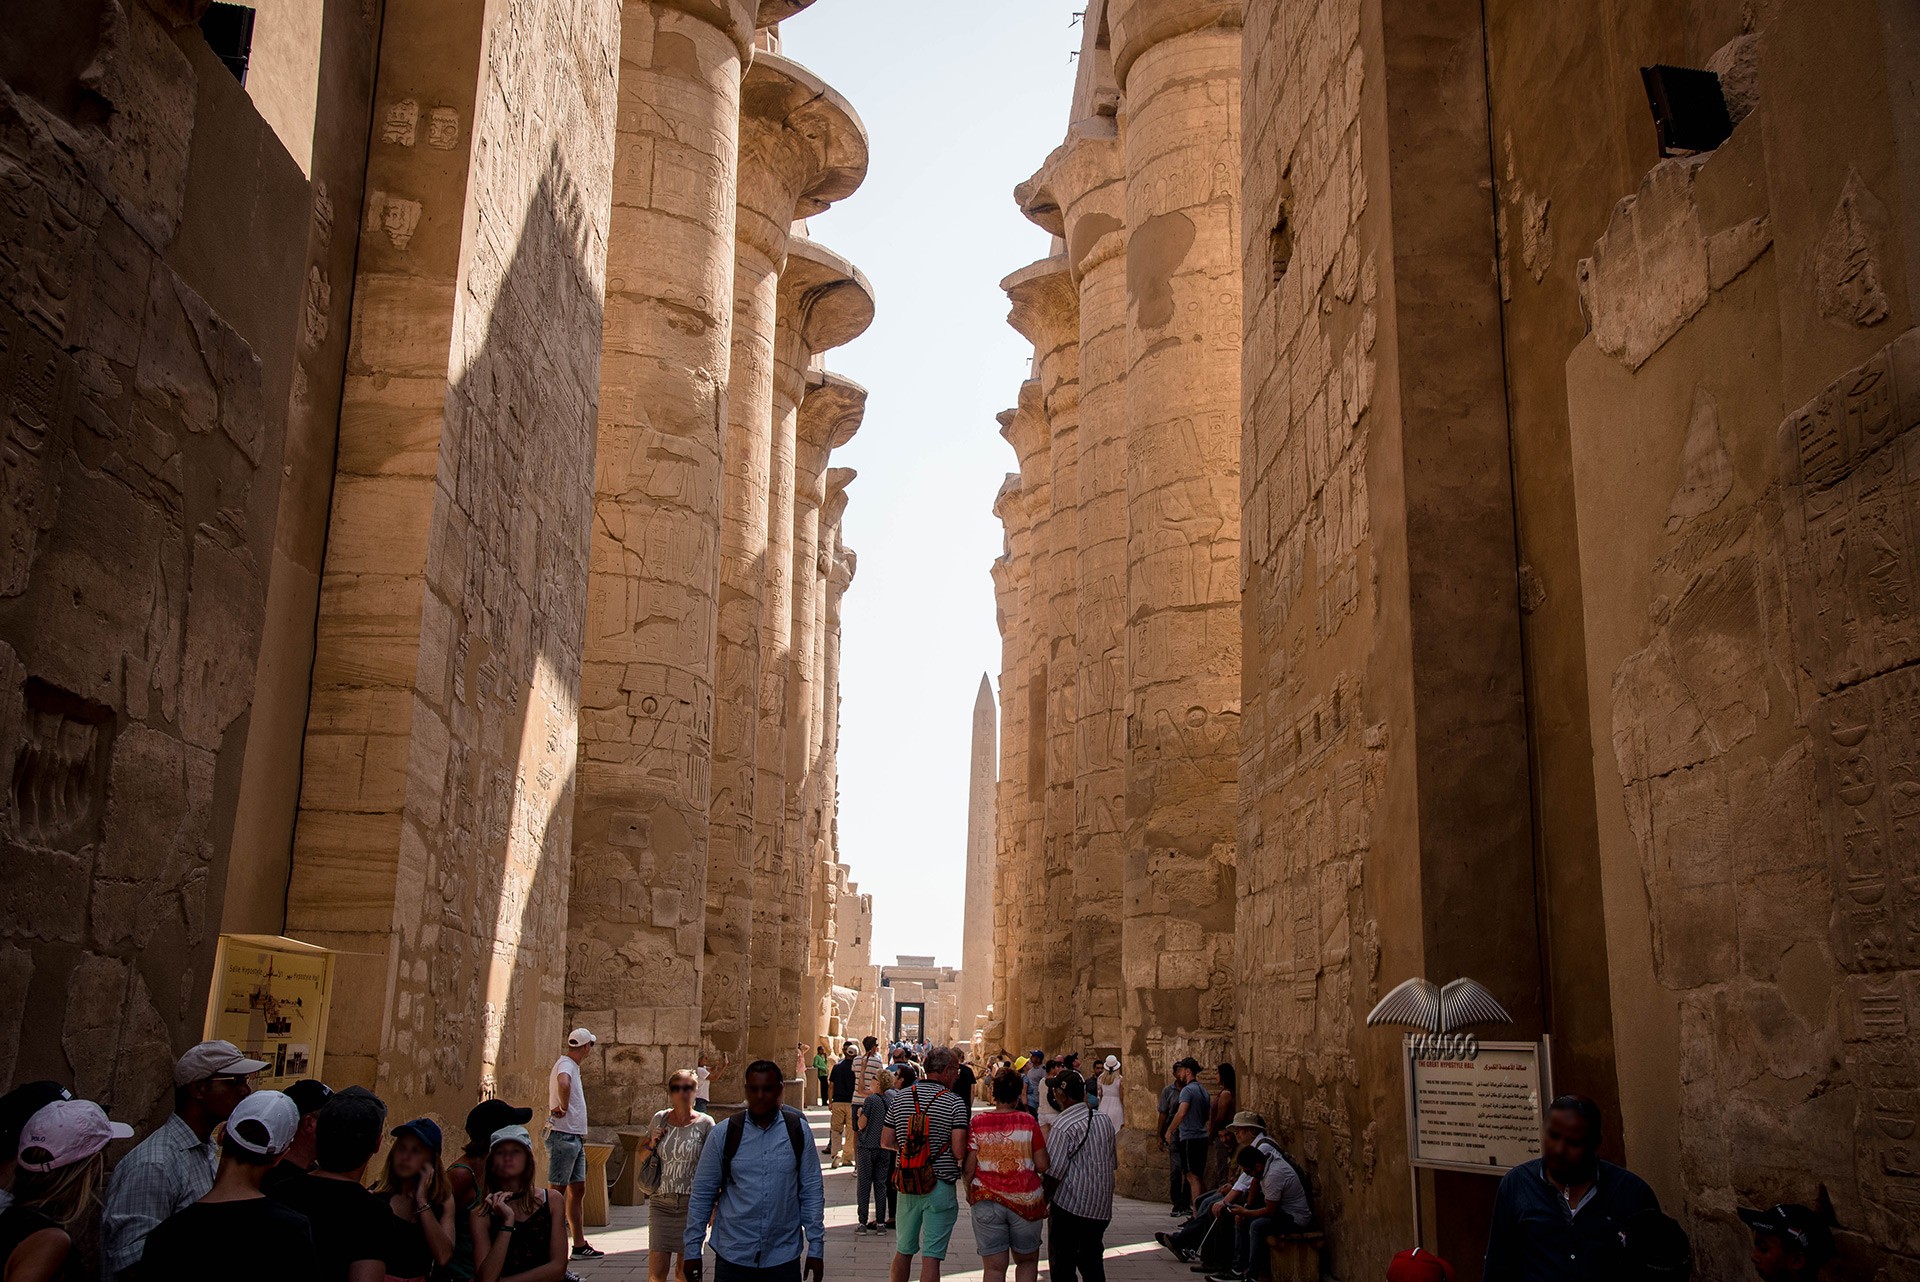 The Hypostyle Hall in Antient Egypt